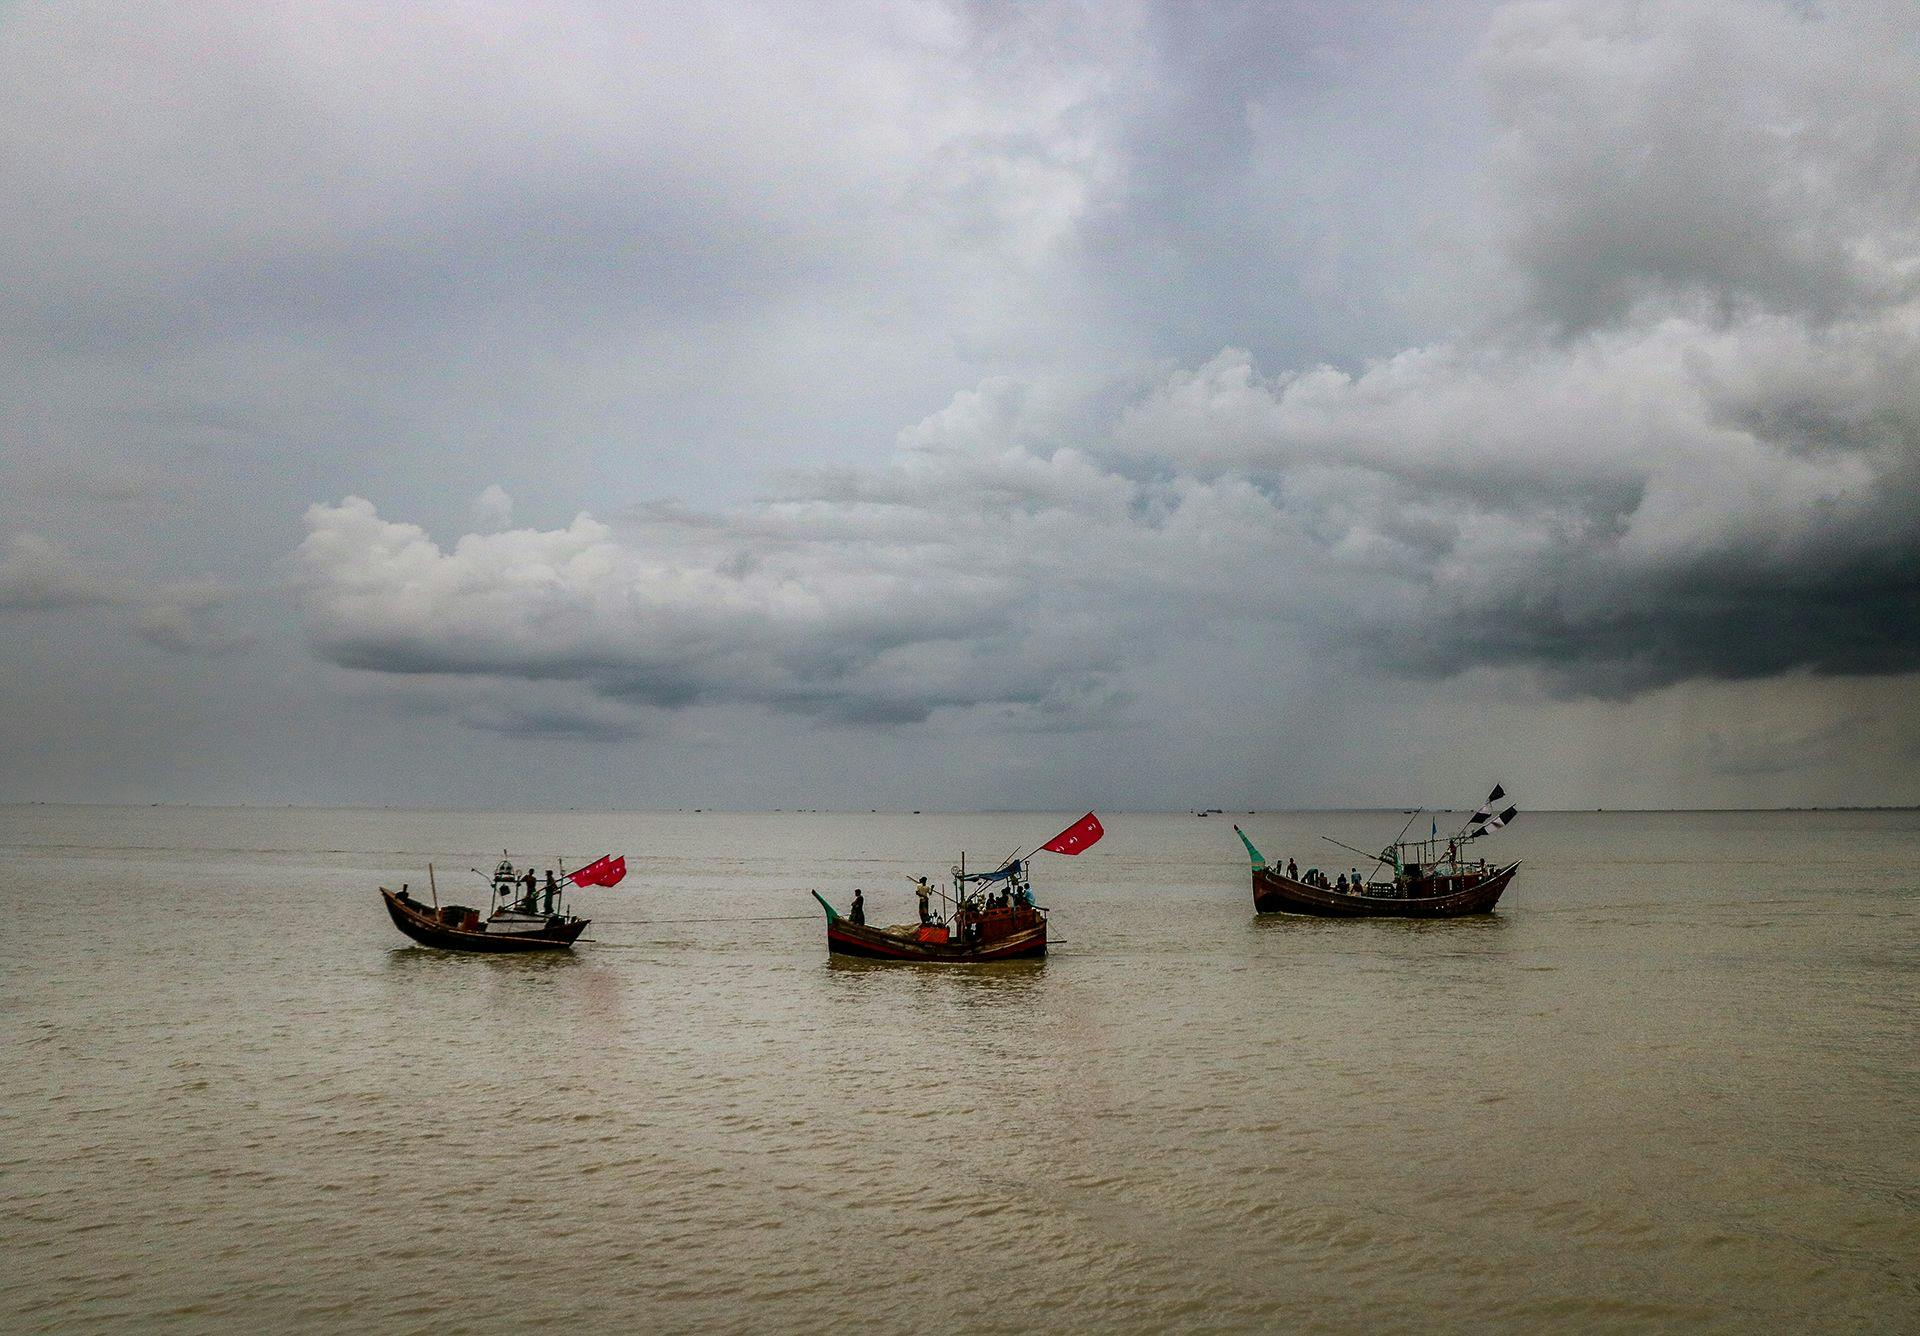 Meghna River today